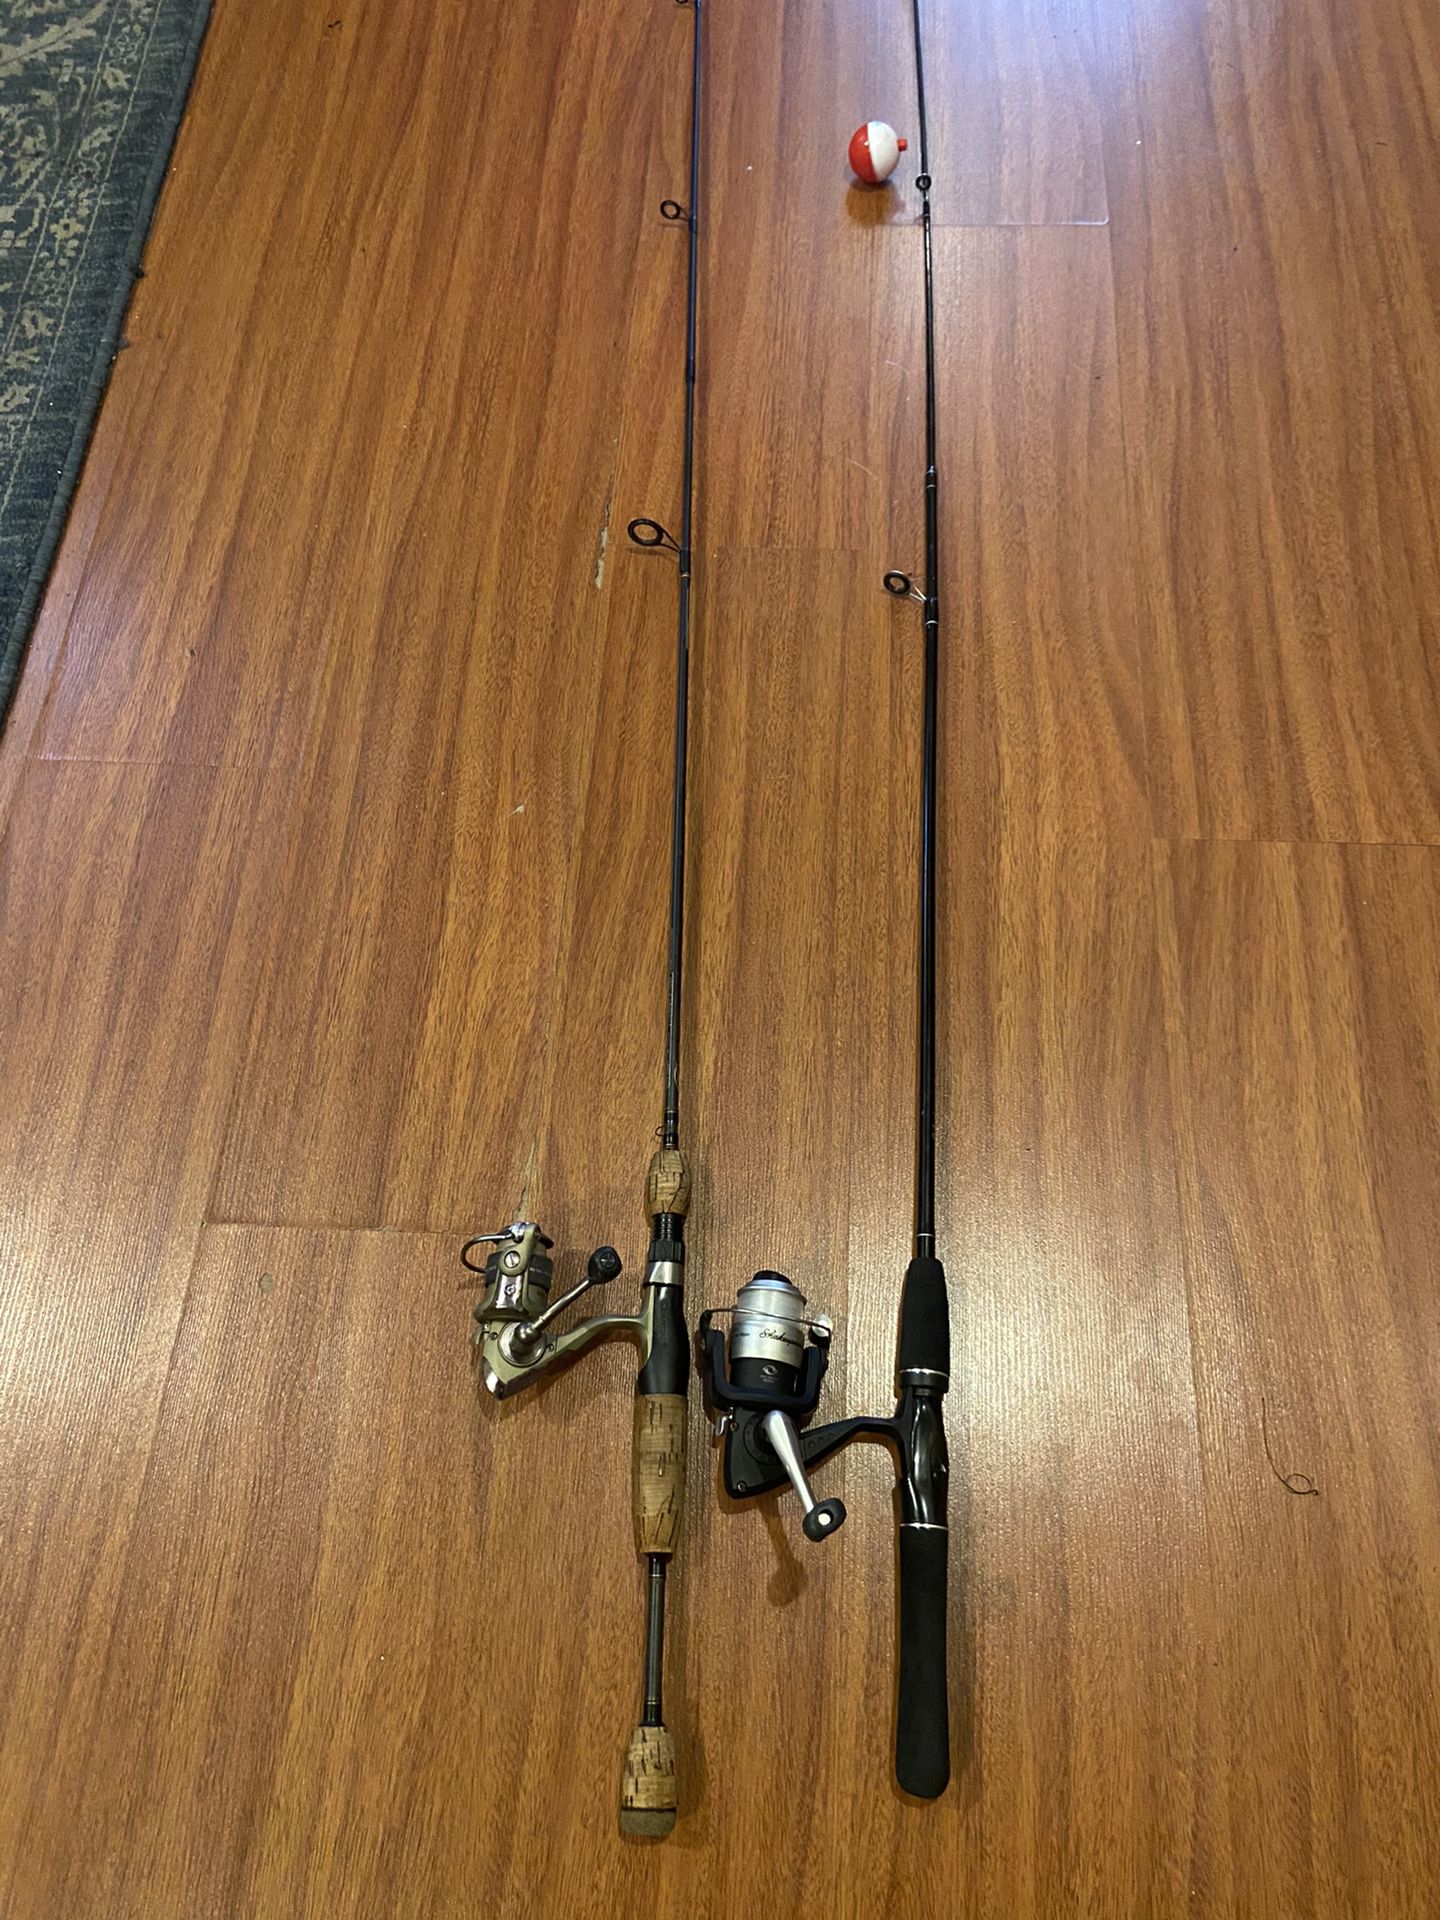 2 combo fishing rods and reels for $70